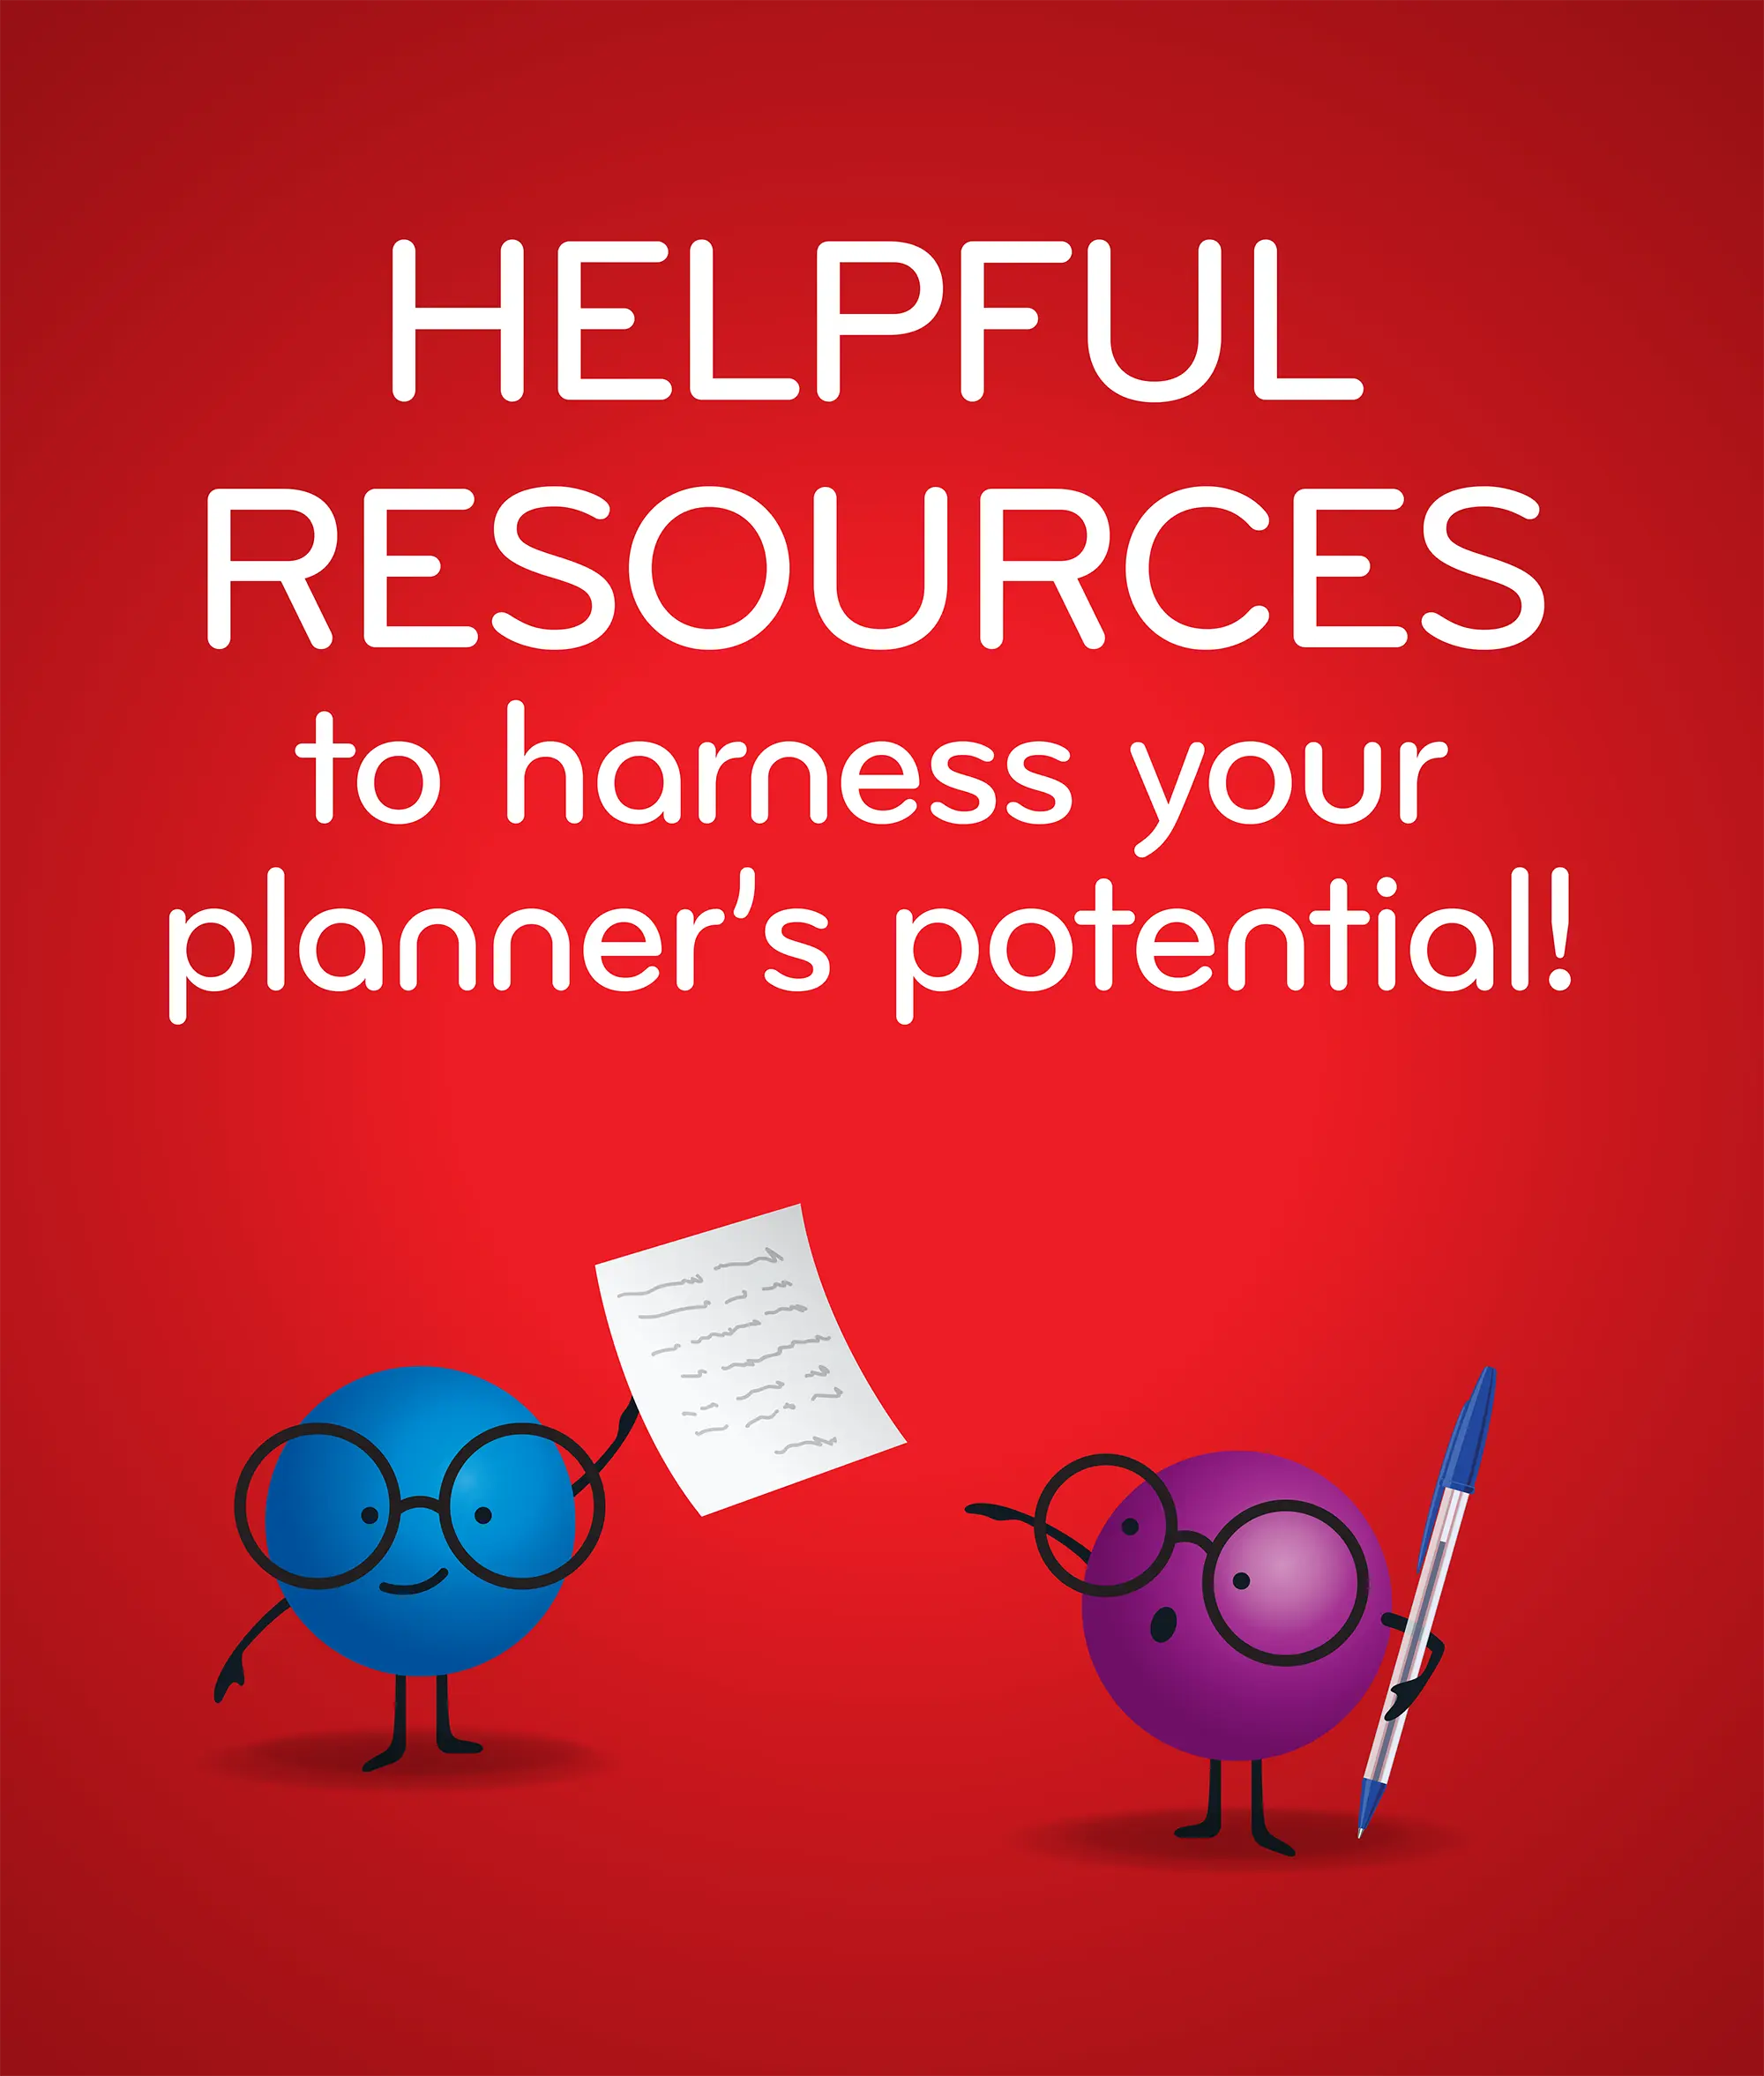 HELPFUL RESOURCES to harness your planner's potential!